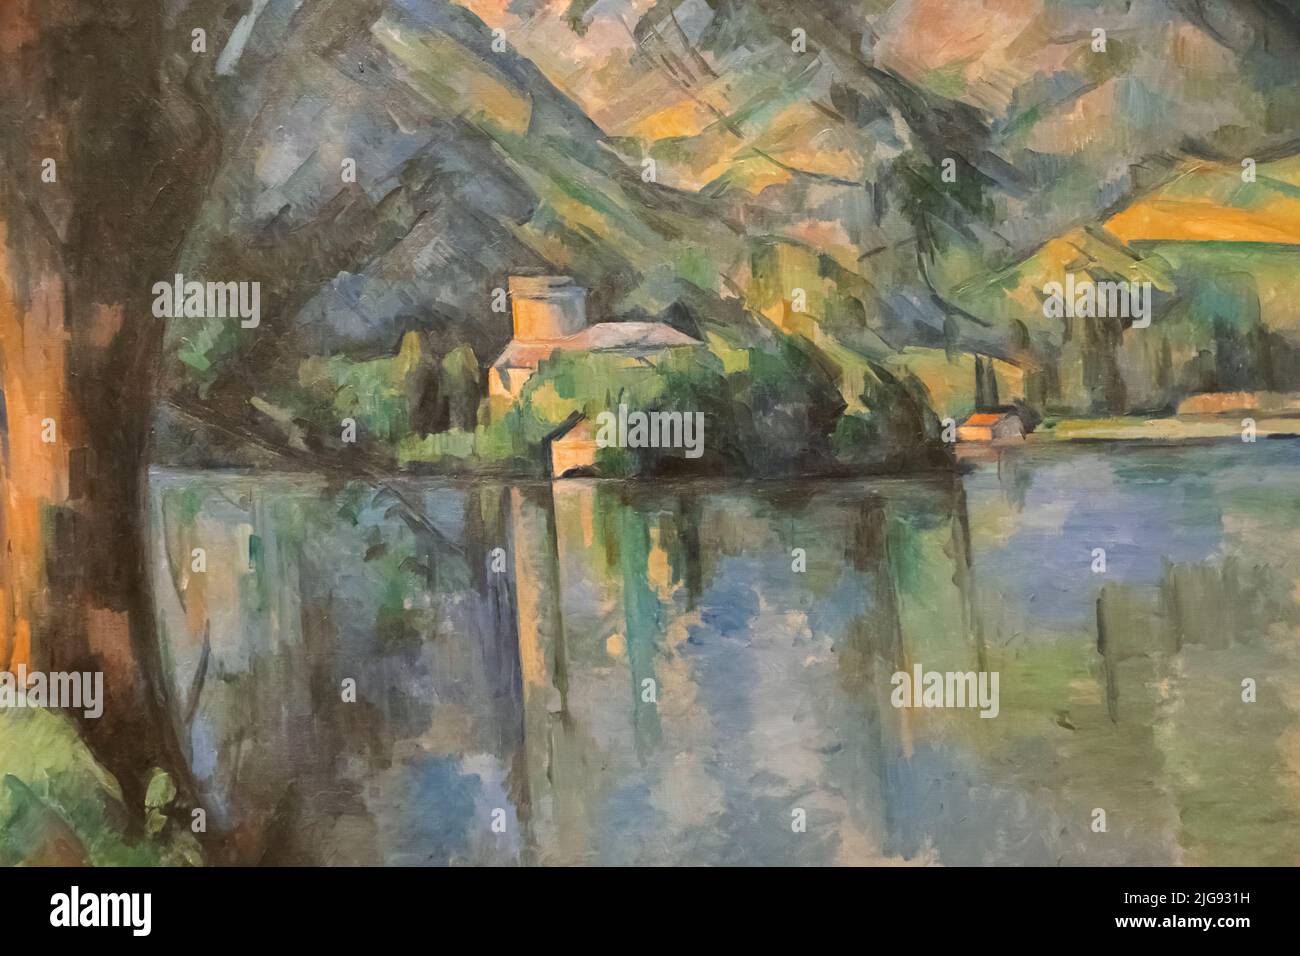 England, London, Somerset House, The Courtauld Gallery, Painting titled 'lac d'Annecy '(Lake Annecy) by Paul Cezanne dated 1896 Stock Photo